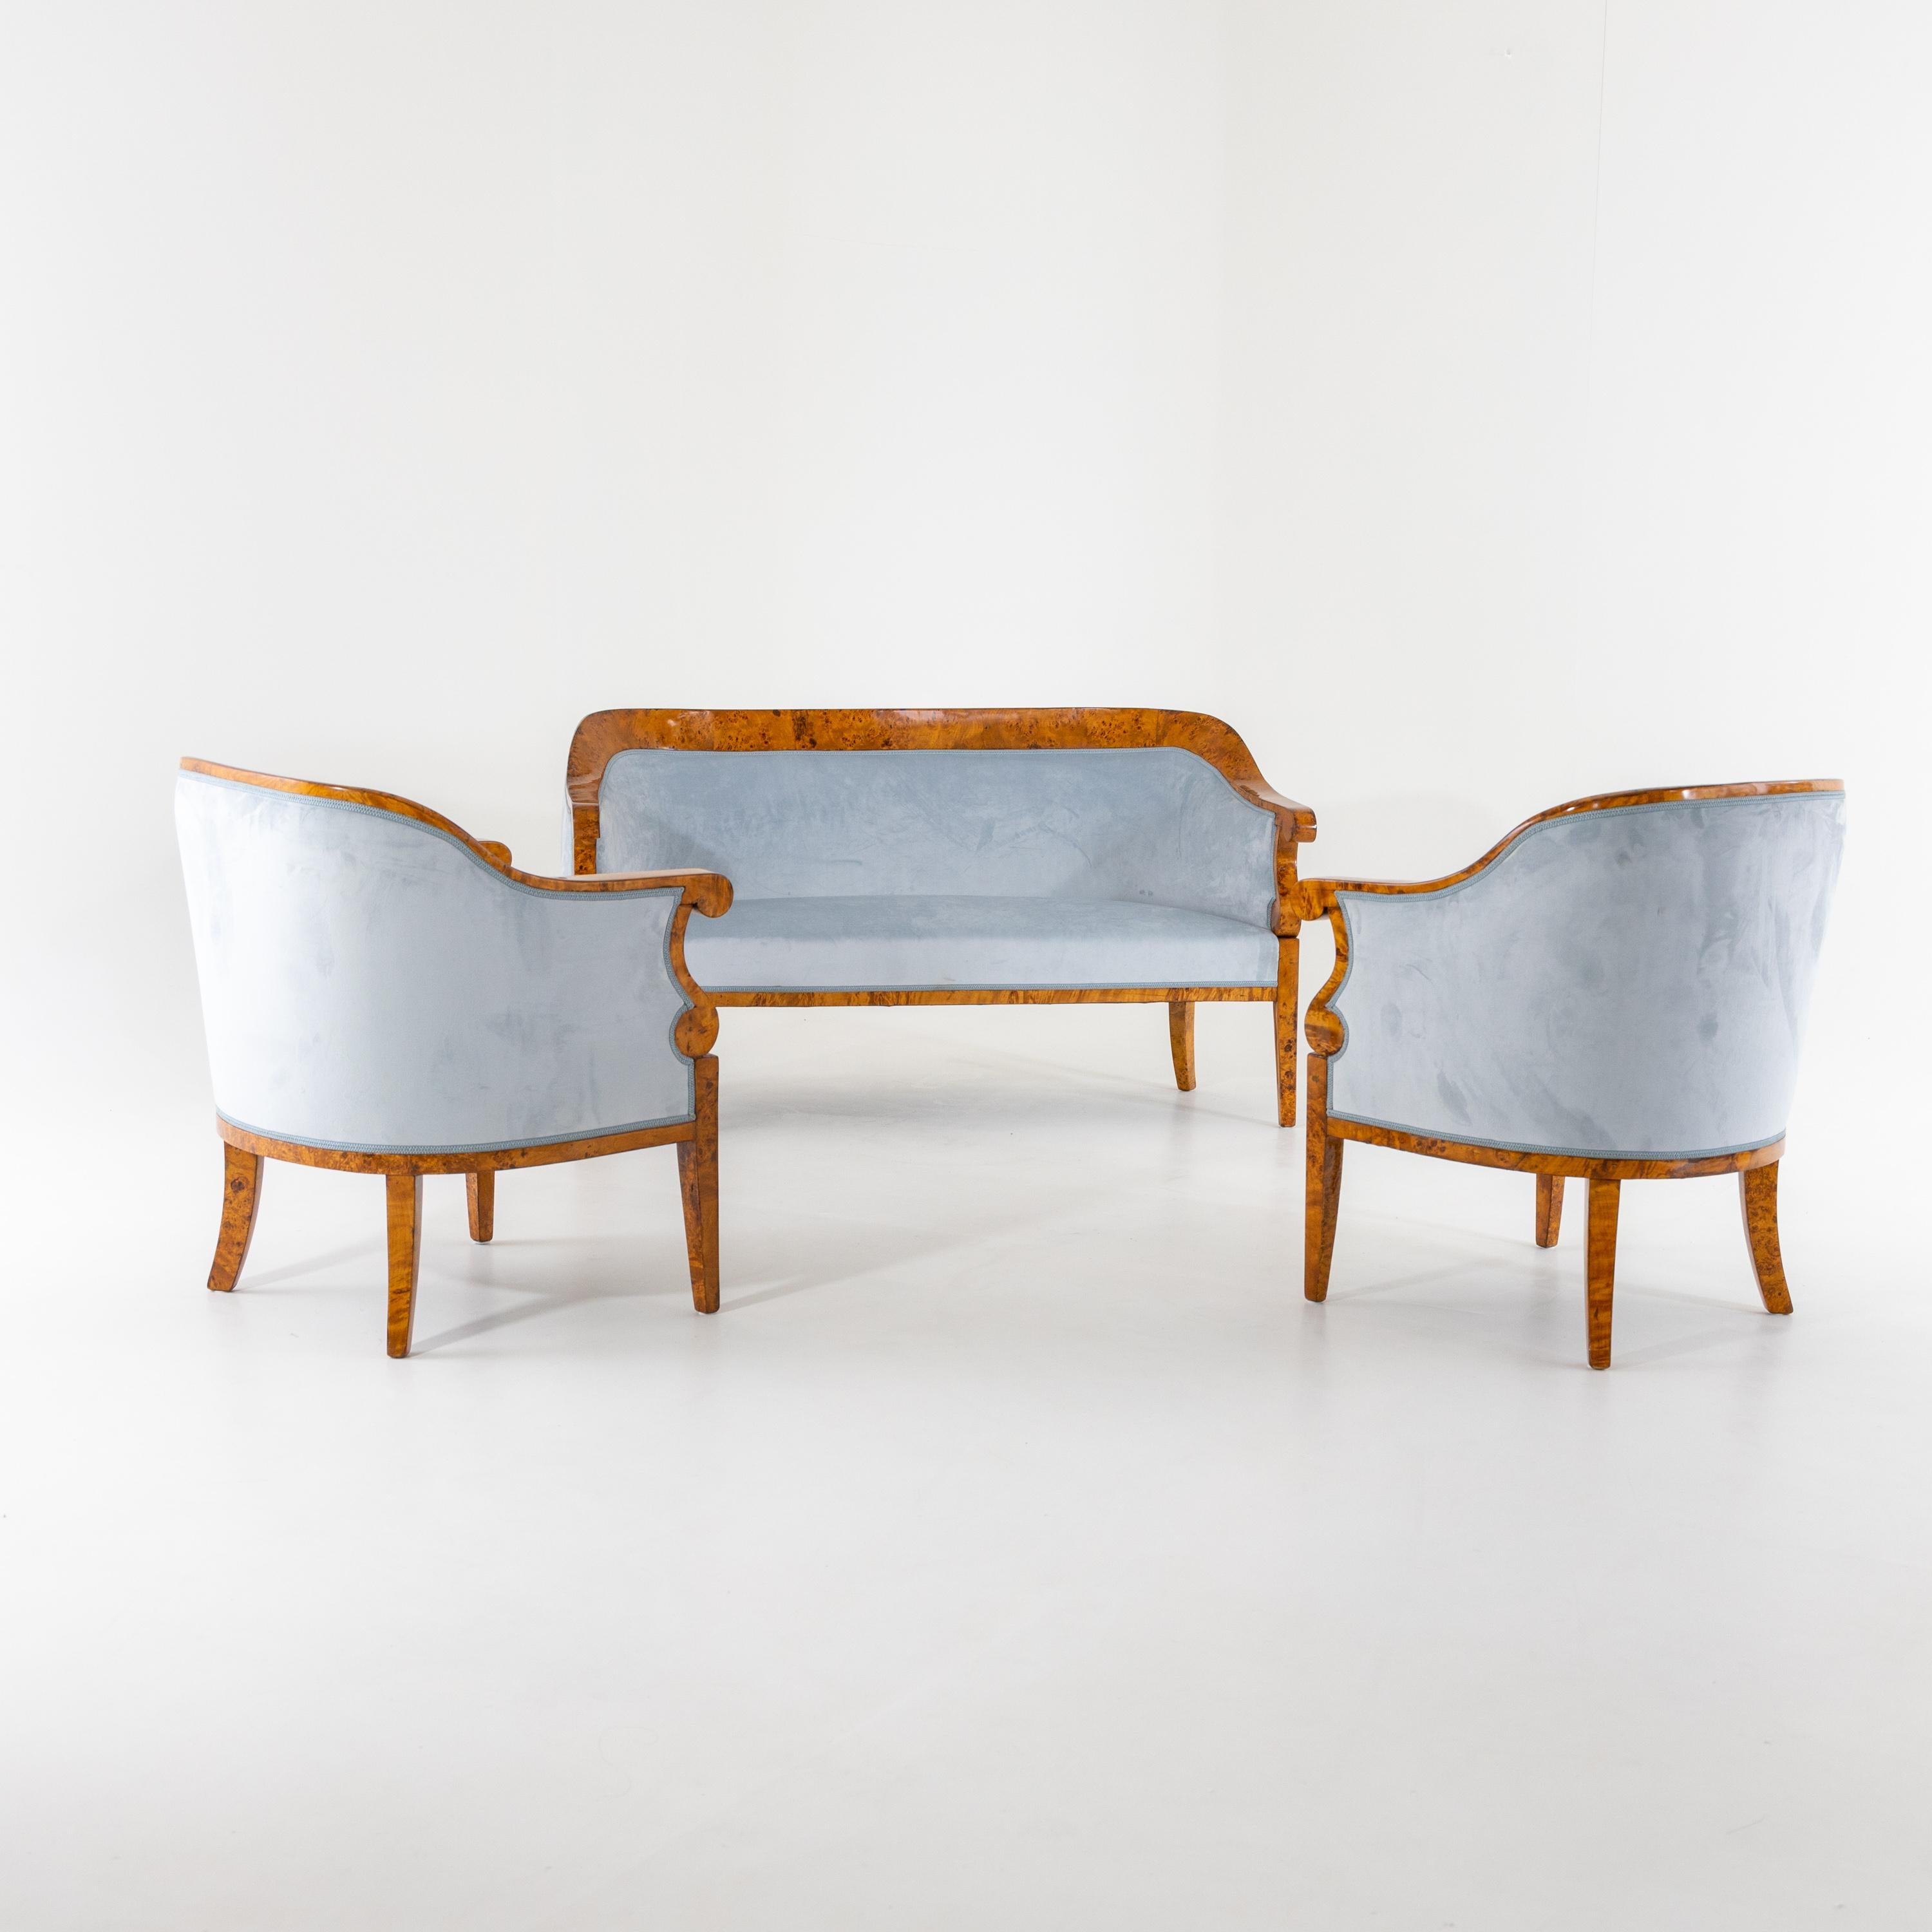 Seating group consisting of a sofa and two bergère chairs veneered in a poplar burl and newly covered with light blue velvet fabric. The group was professionally restored and hand-polished.